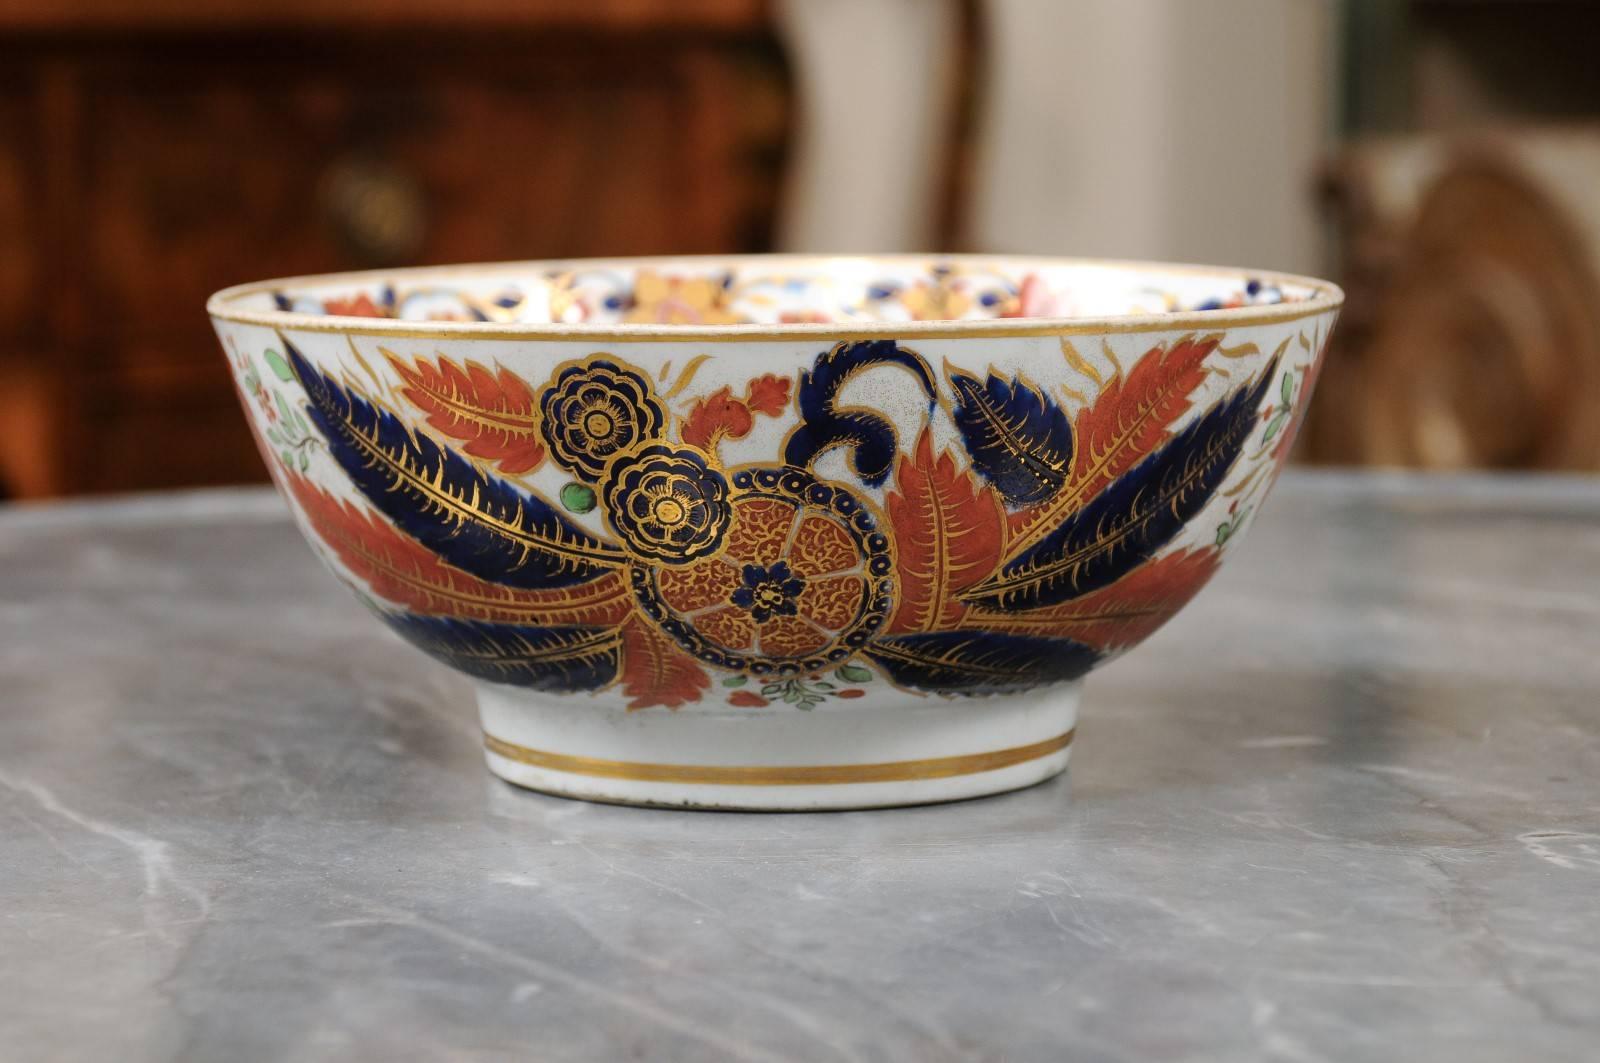 English Spode “Tabacco Leaf” Punch Bowl after Chinese Export Design, England, ca. 1820 For Sale